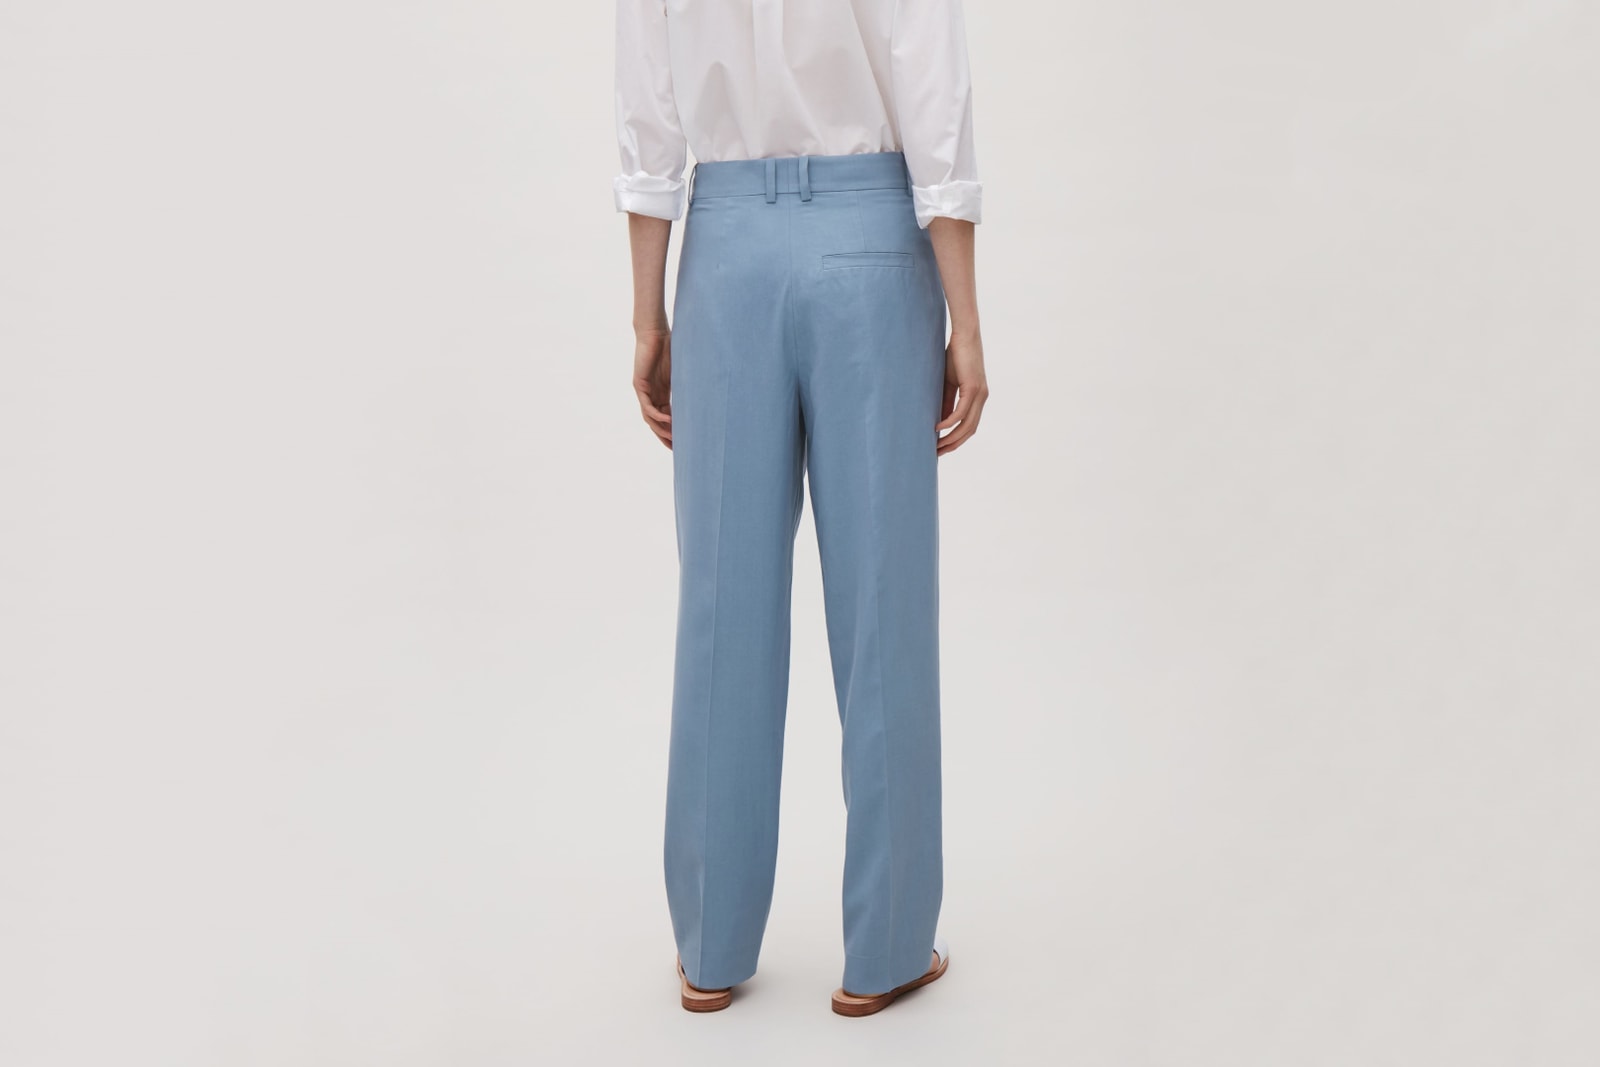 cos silk trousers tailored pastel blue editors pick